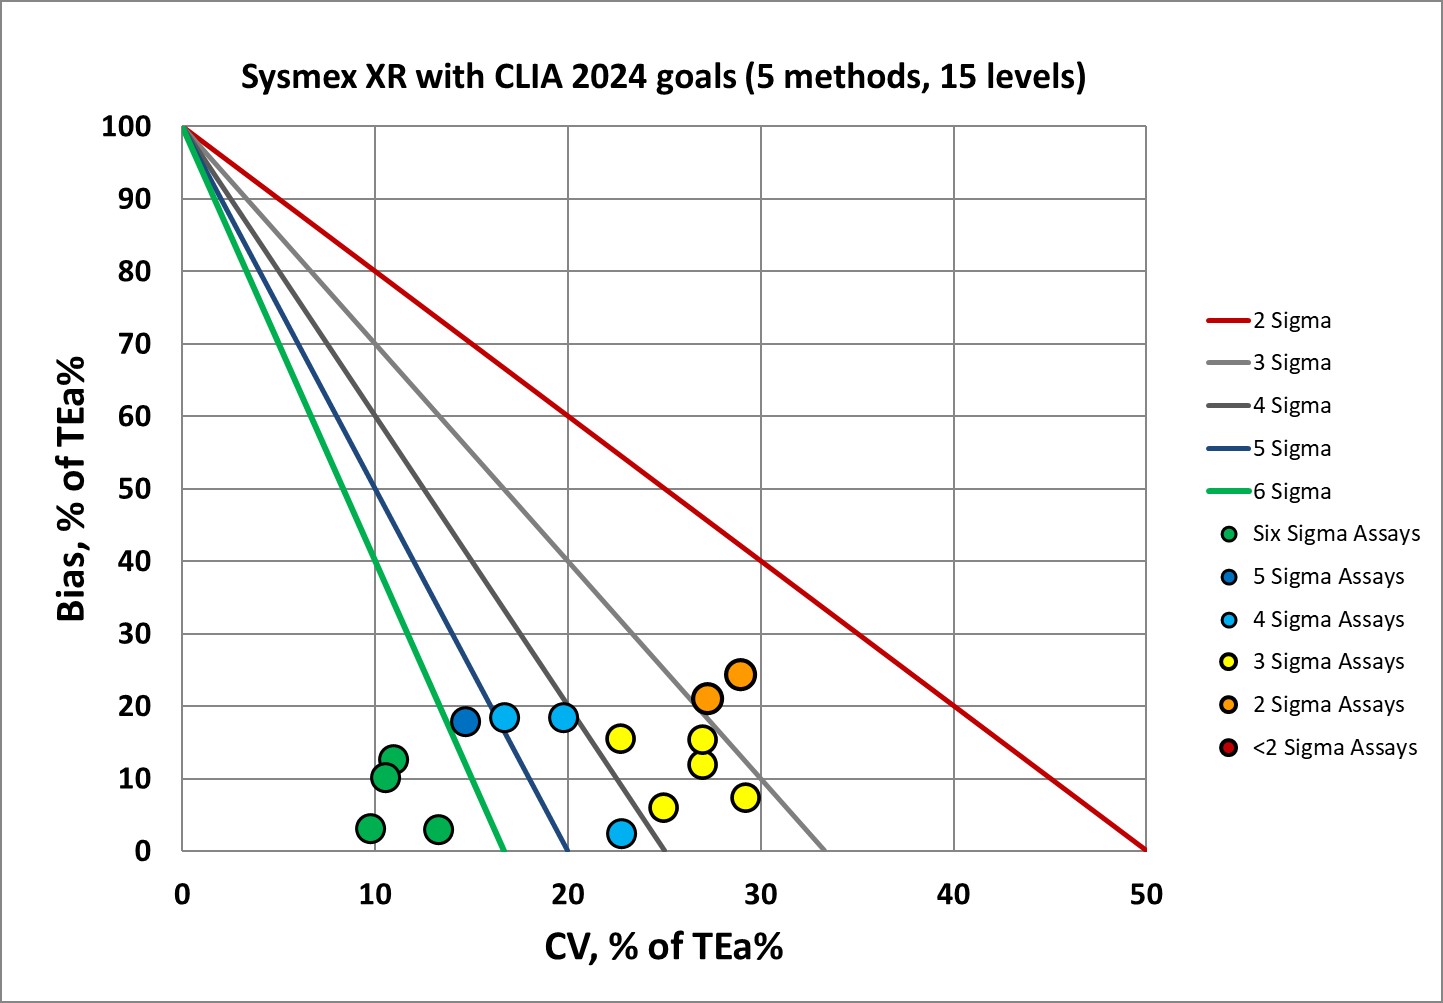 Sysmex XR with CLIA 2024 goals NMEDx